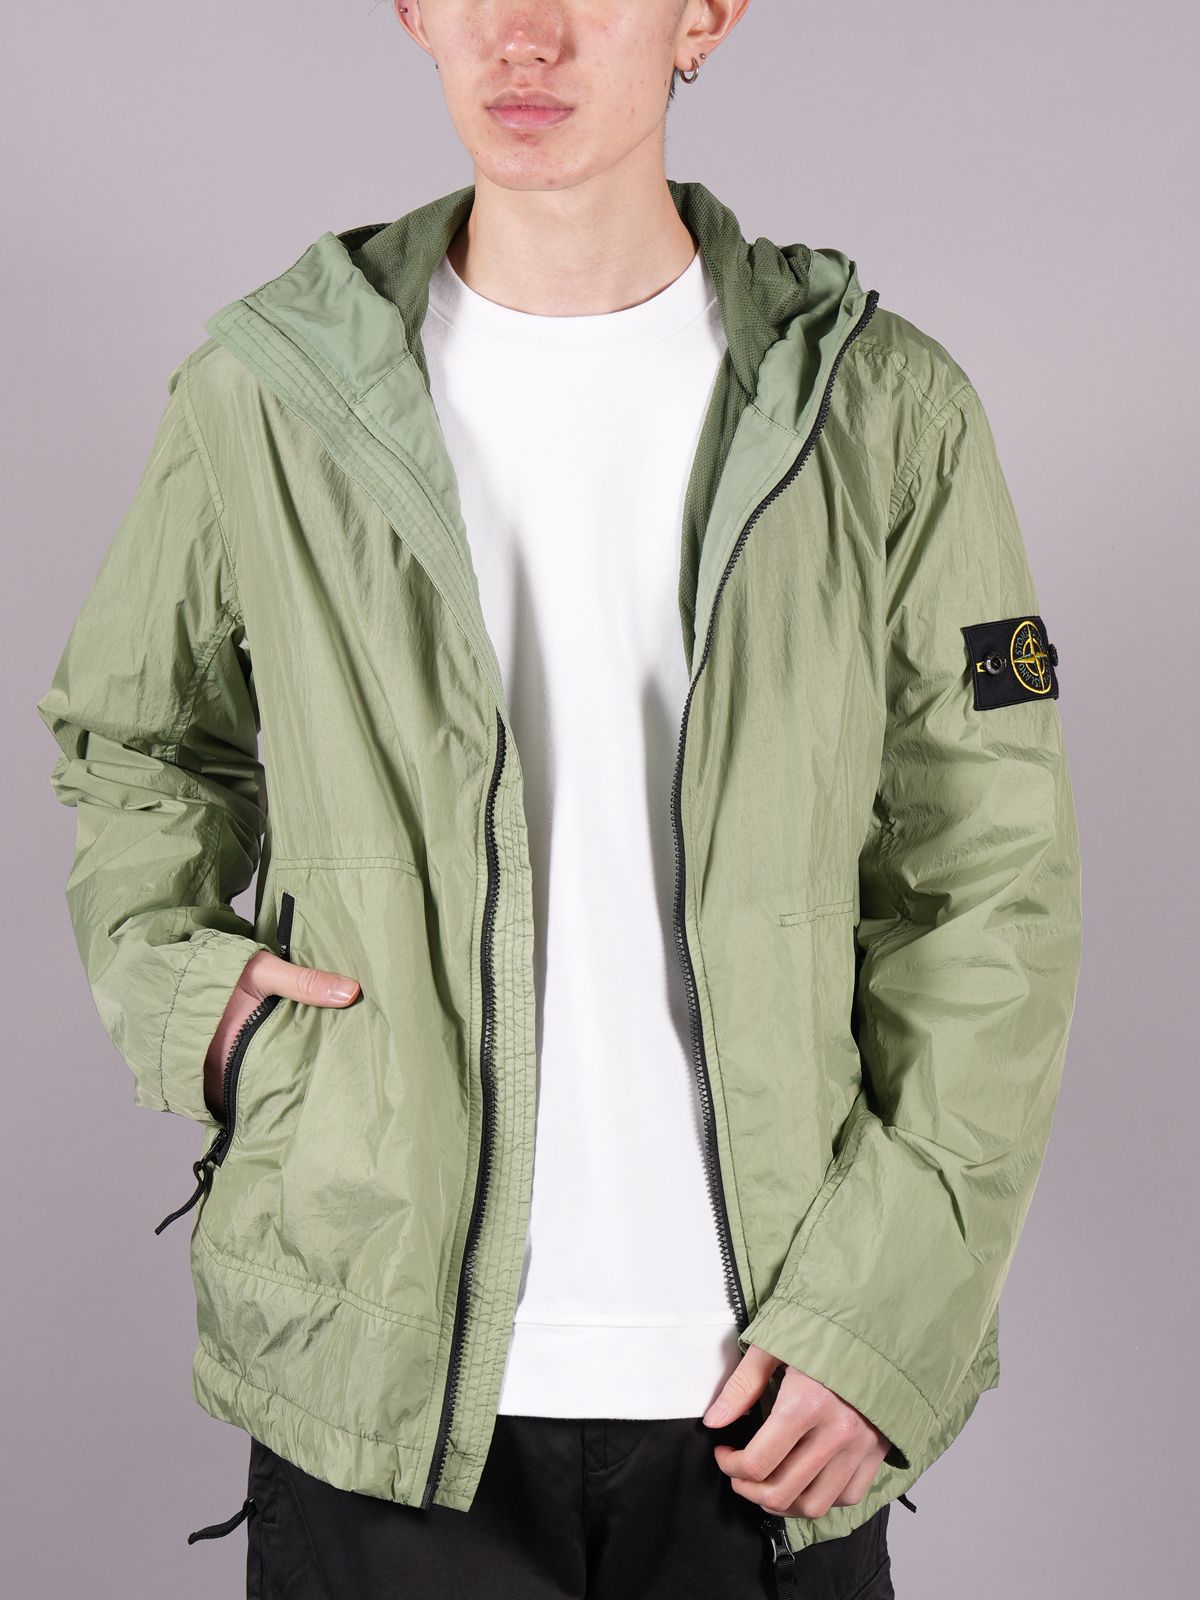 STONE ISLAND - 【ラスト1点】 40522 Crinkle Reps NY Hooded 